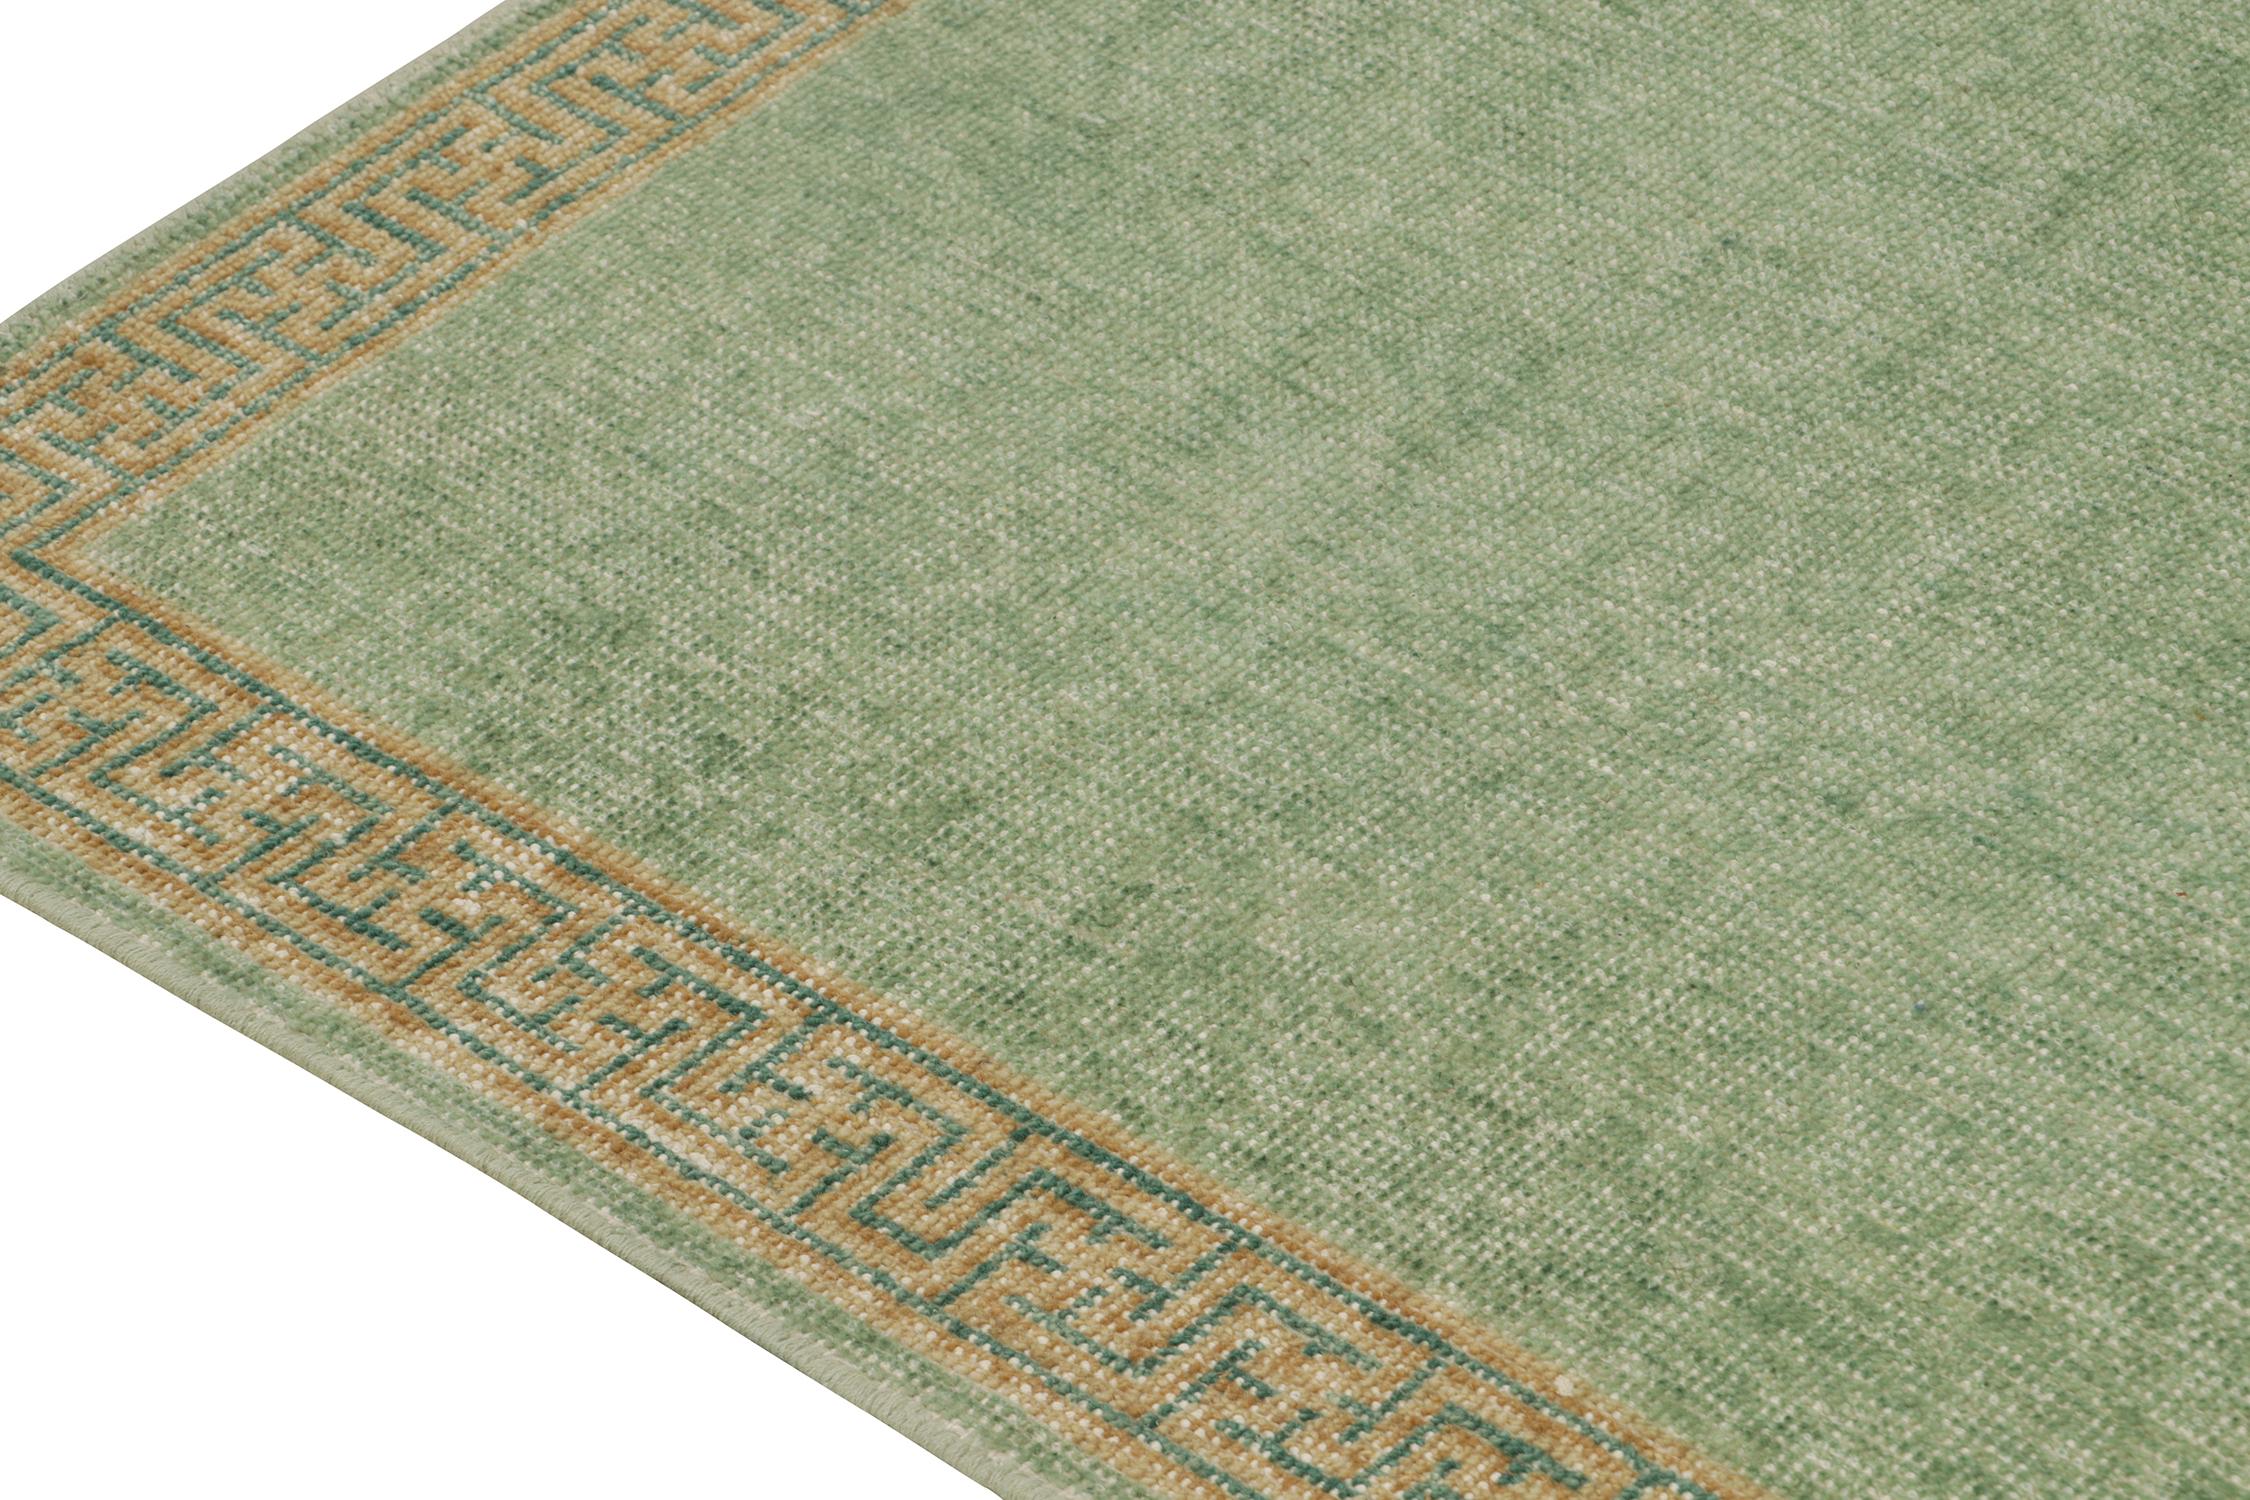 Rug & Kilim’s Distressed Style Tiger Runner in Green, Beige & Black Pictorial In New Condition For Sale In Long Island City, NY